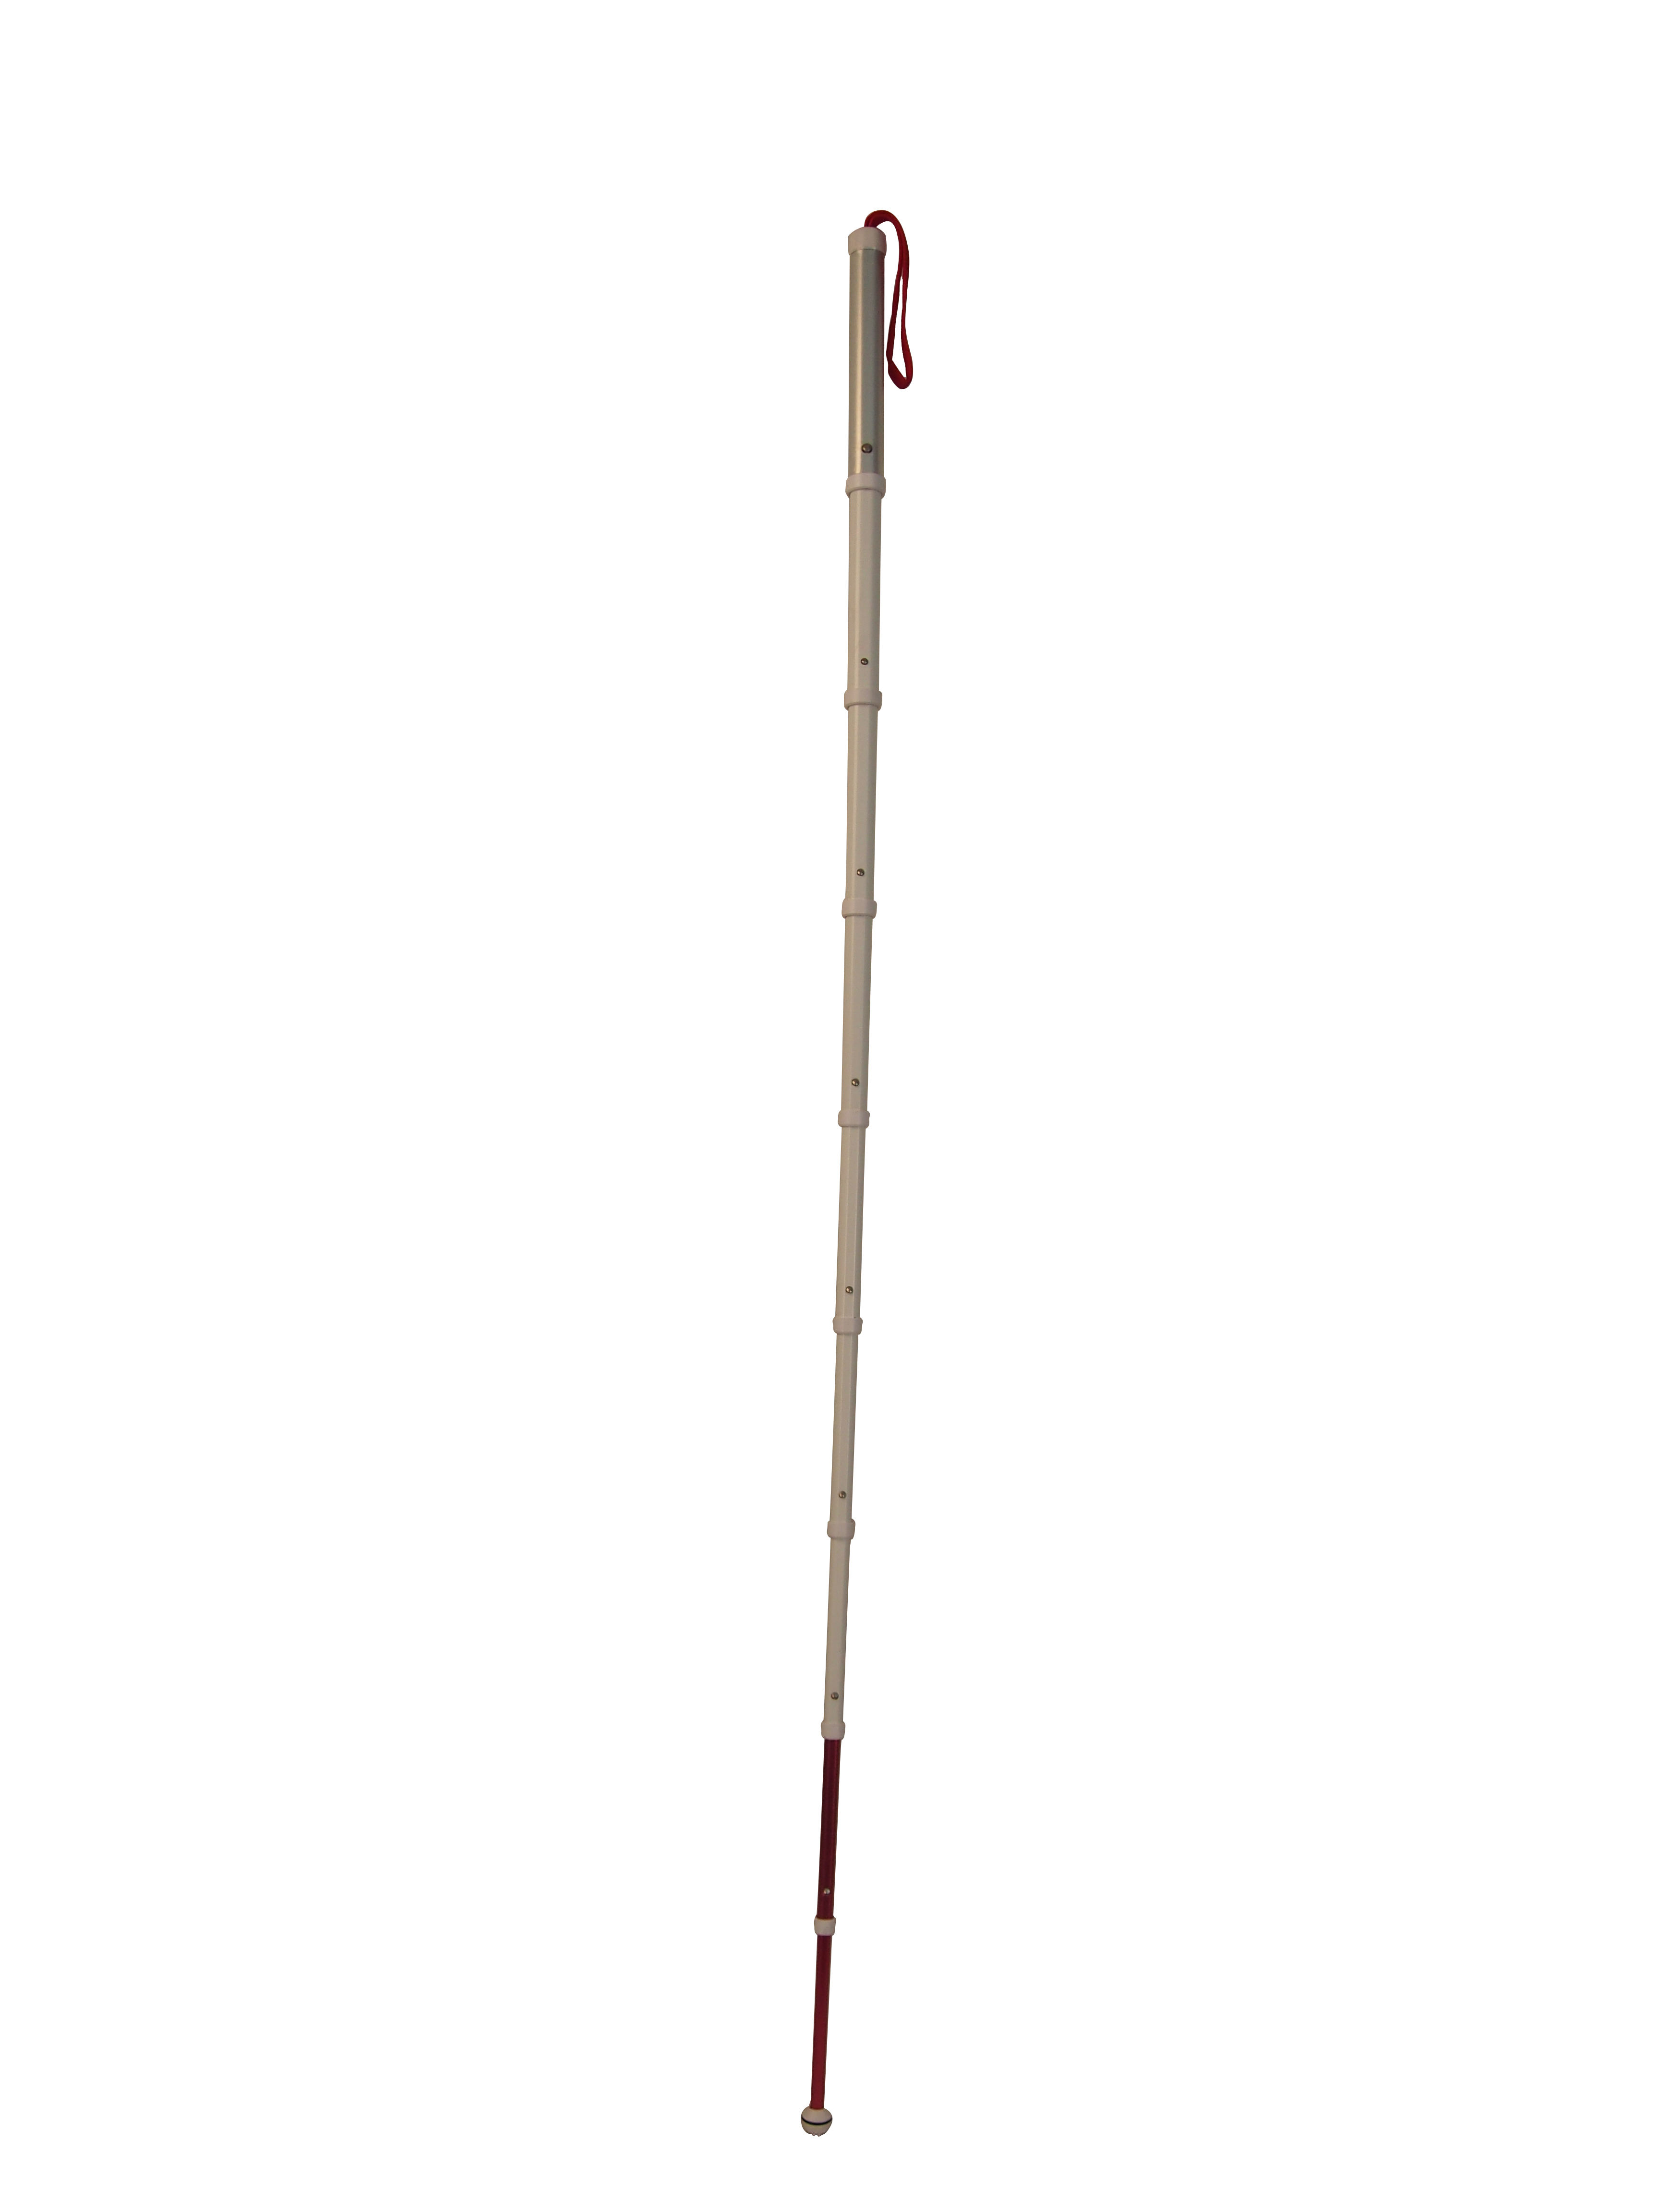 Blind Cane,stretchable cane,Walking Stick for Vision Impaired and Blind people